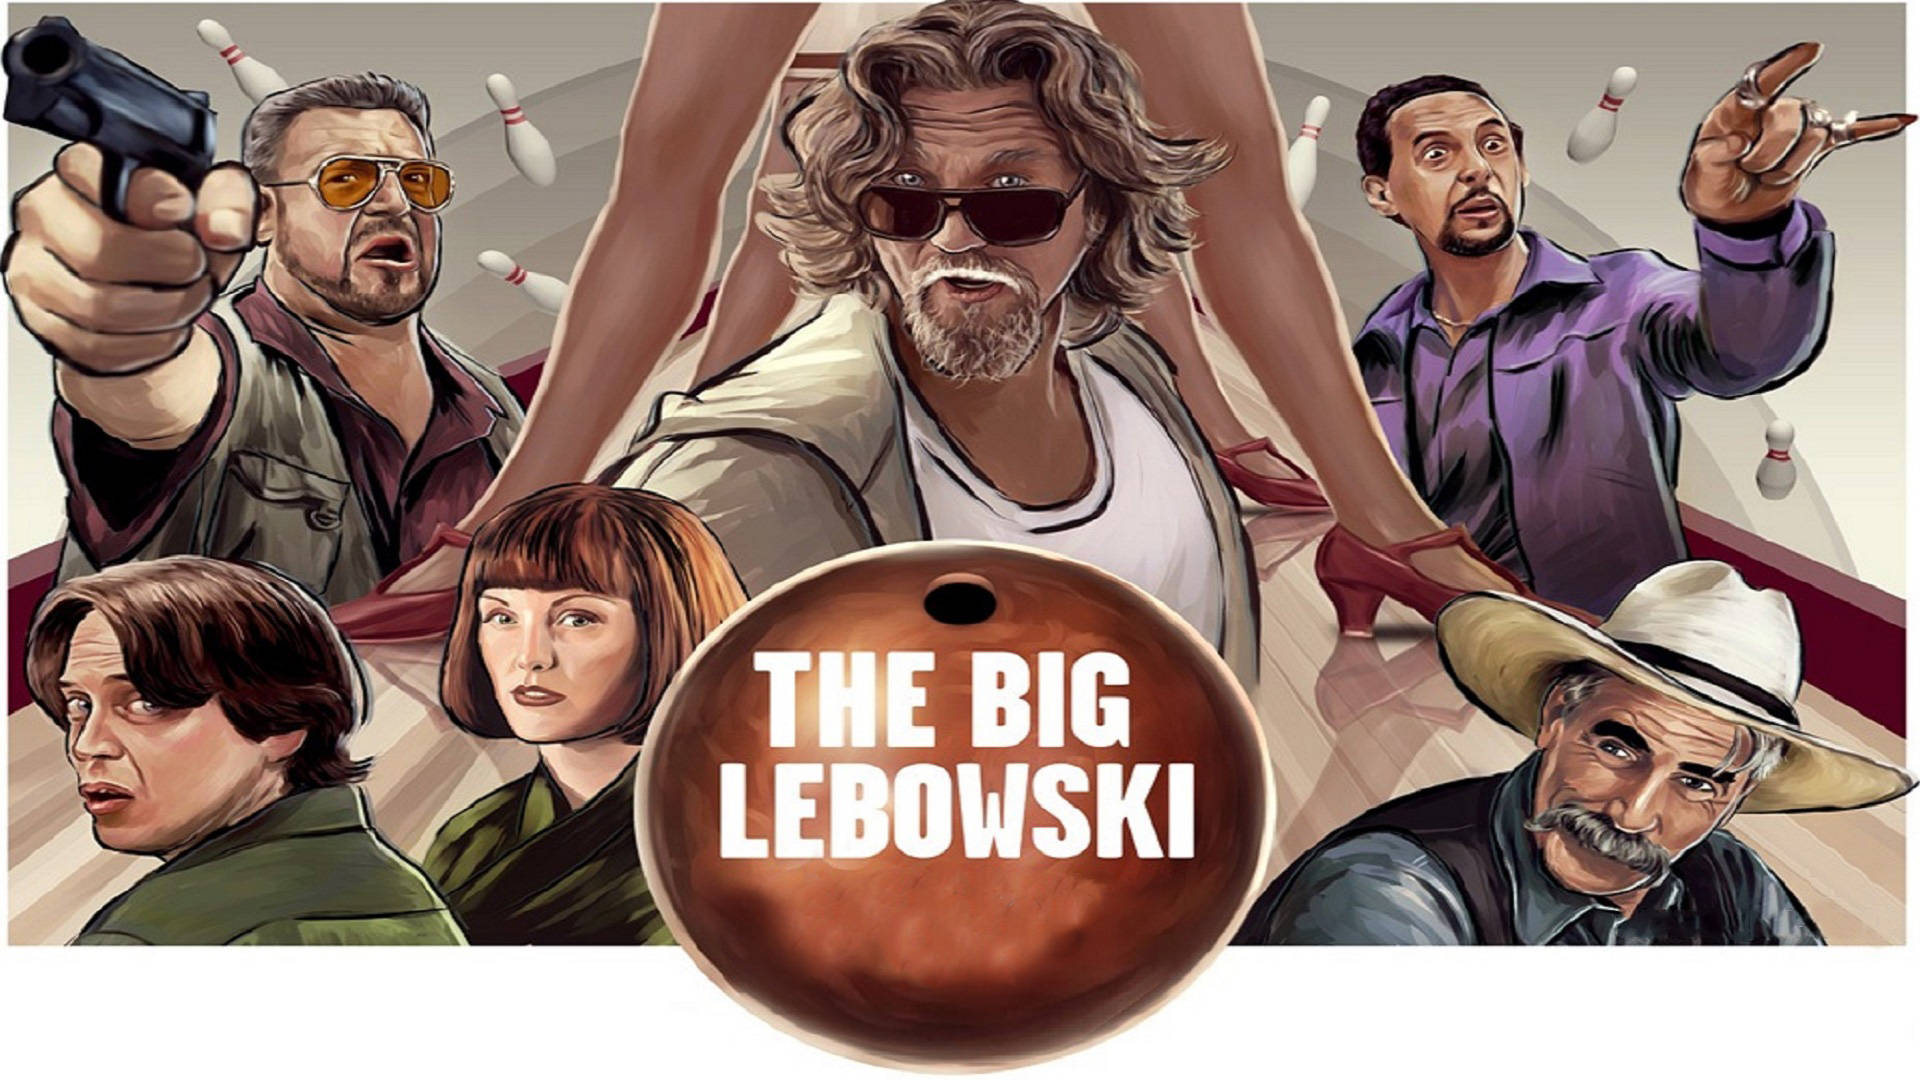 The Dude from The Big Lebowski Movie Illustration Art Wallpaper